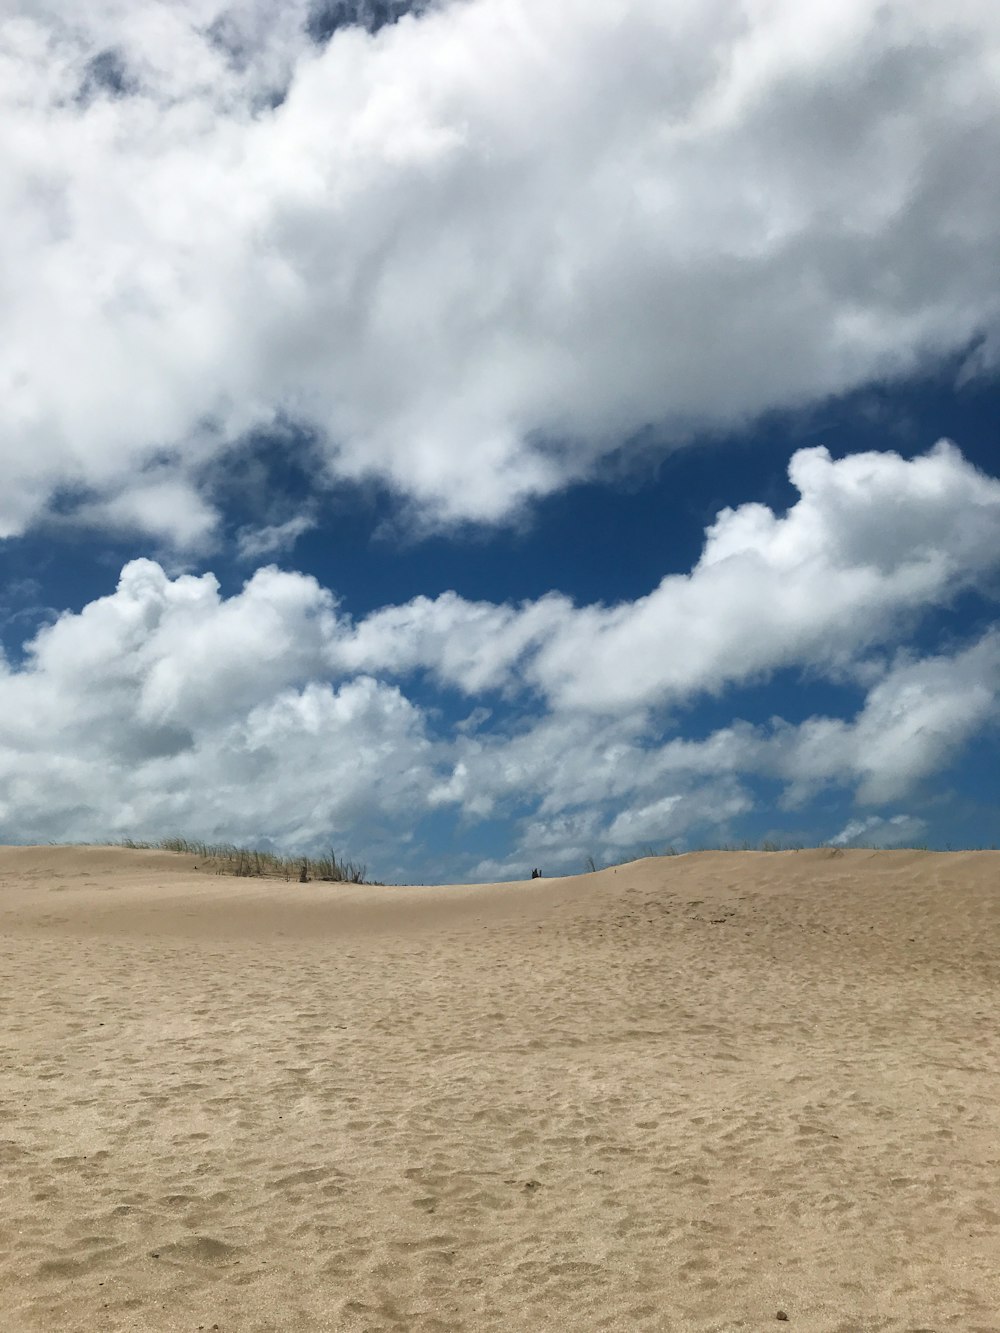 brown sand under blue sky and white clouds during daytime